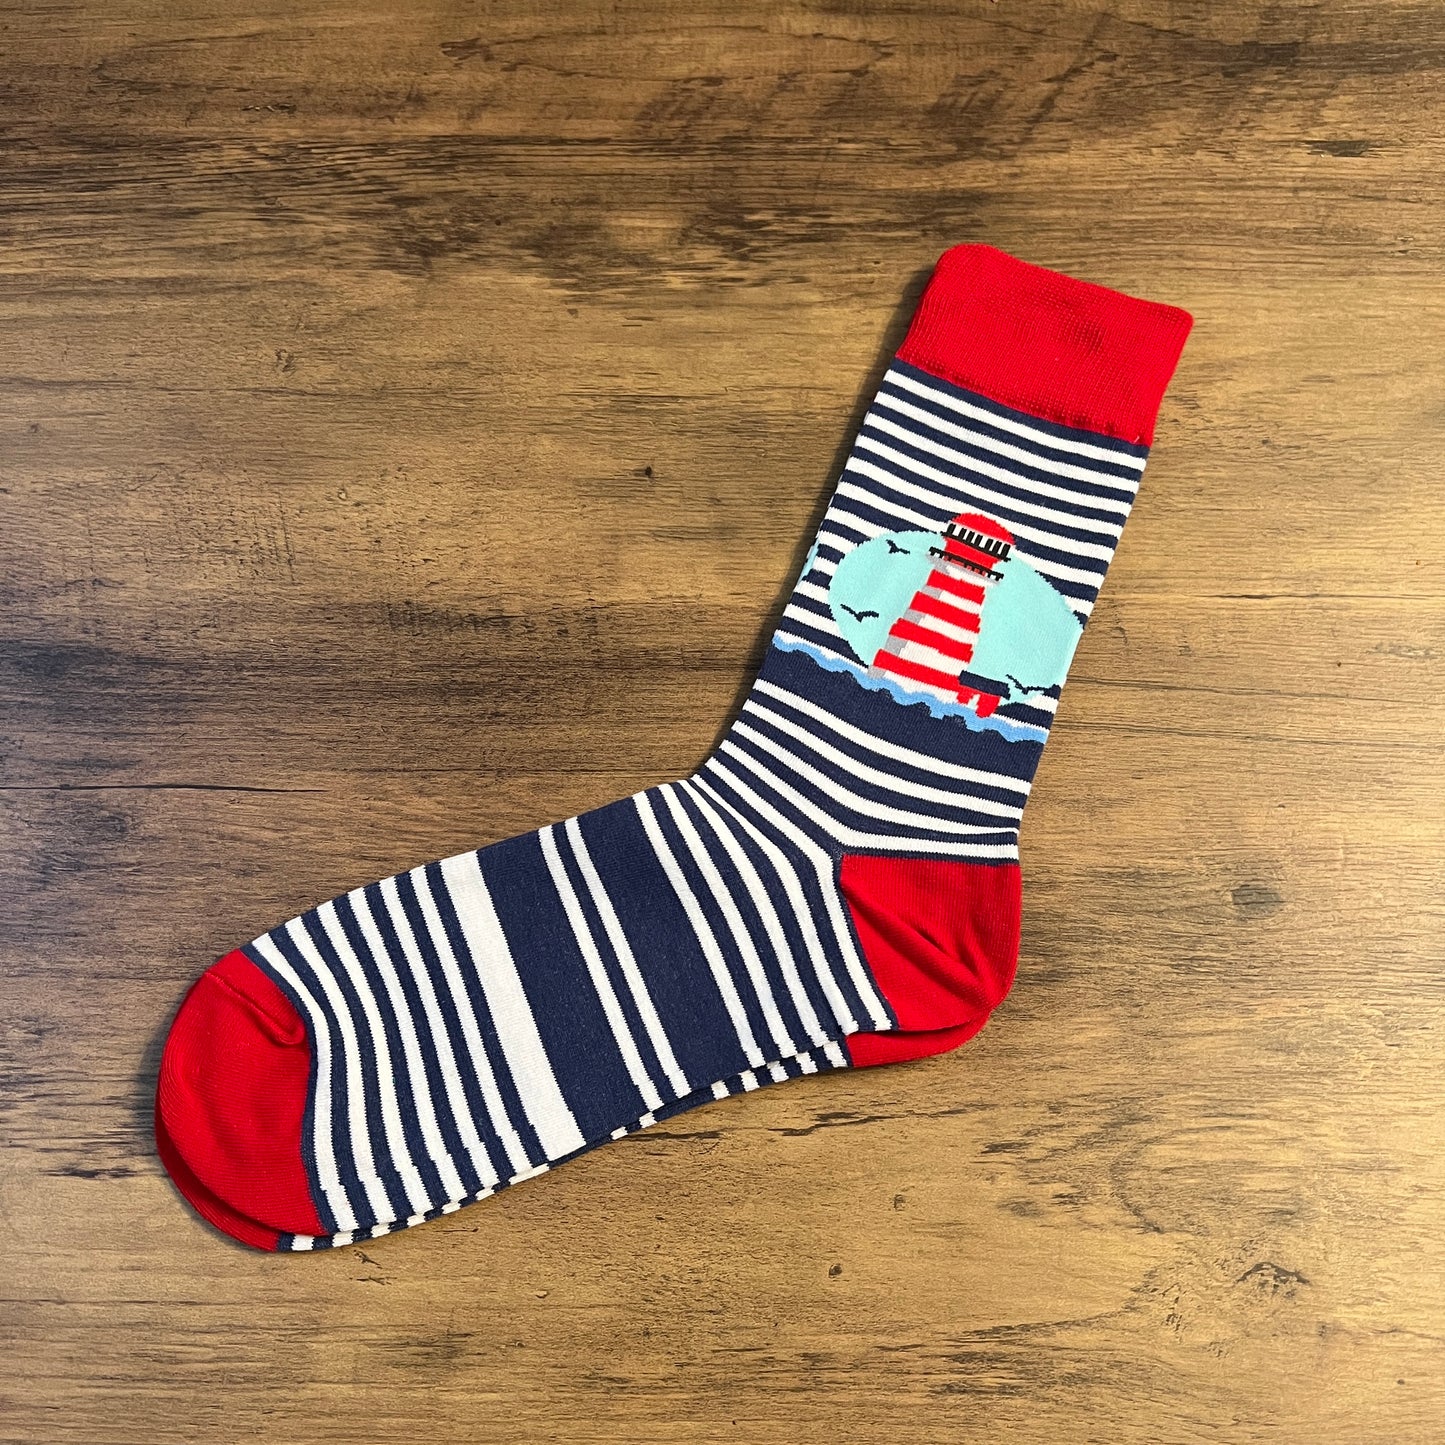 Tasker & Shaw | Luxury Menswear | Red, white and blue striped "Lighthouse" socks